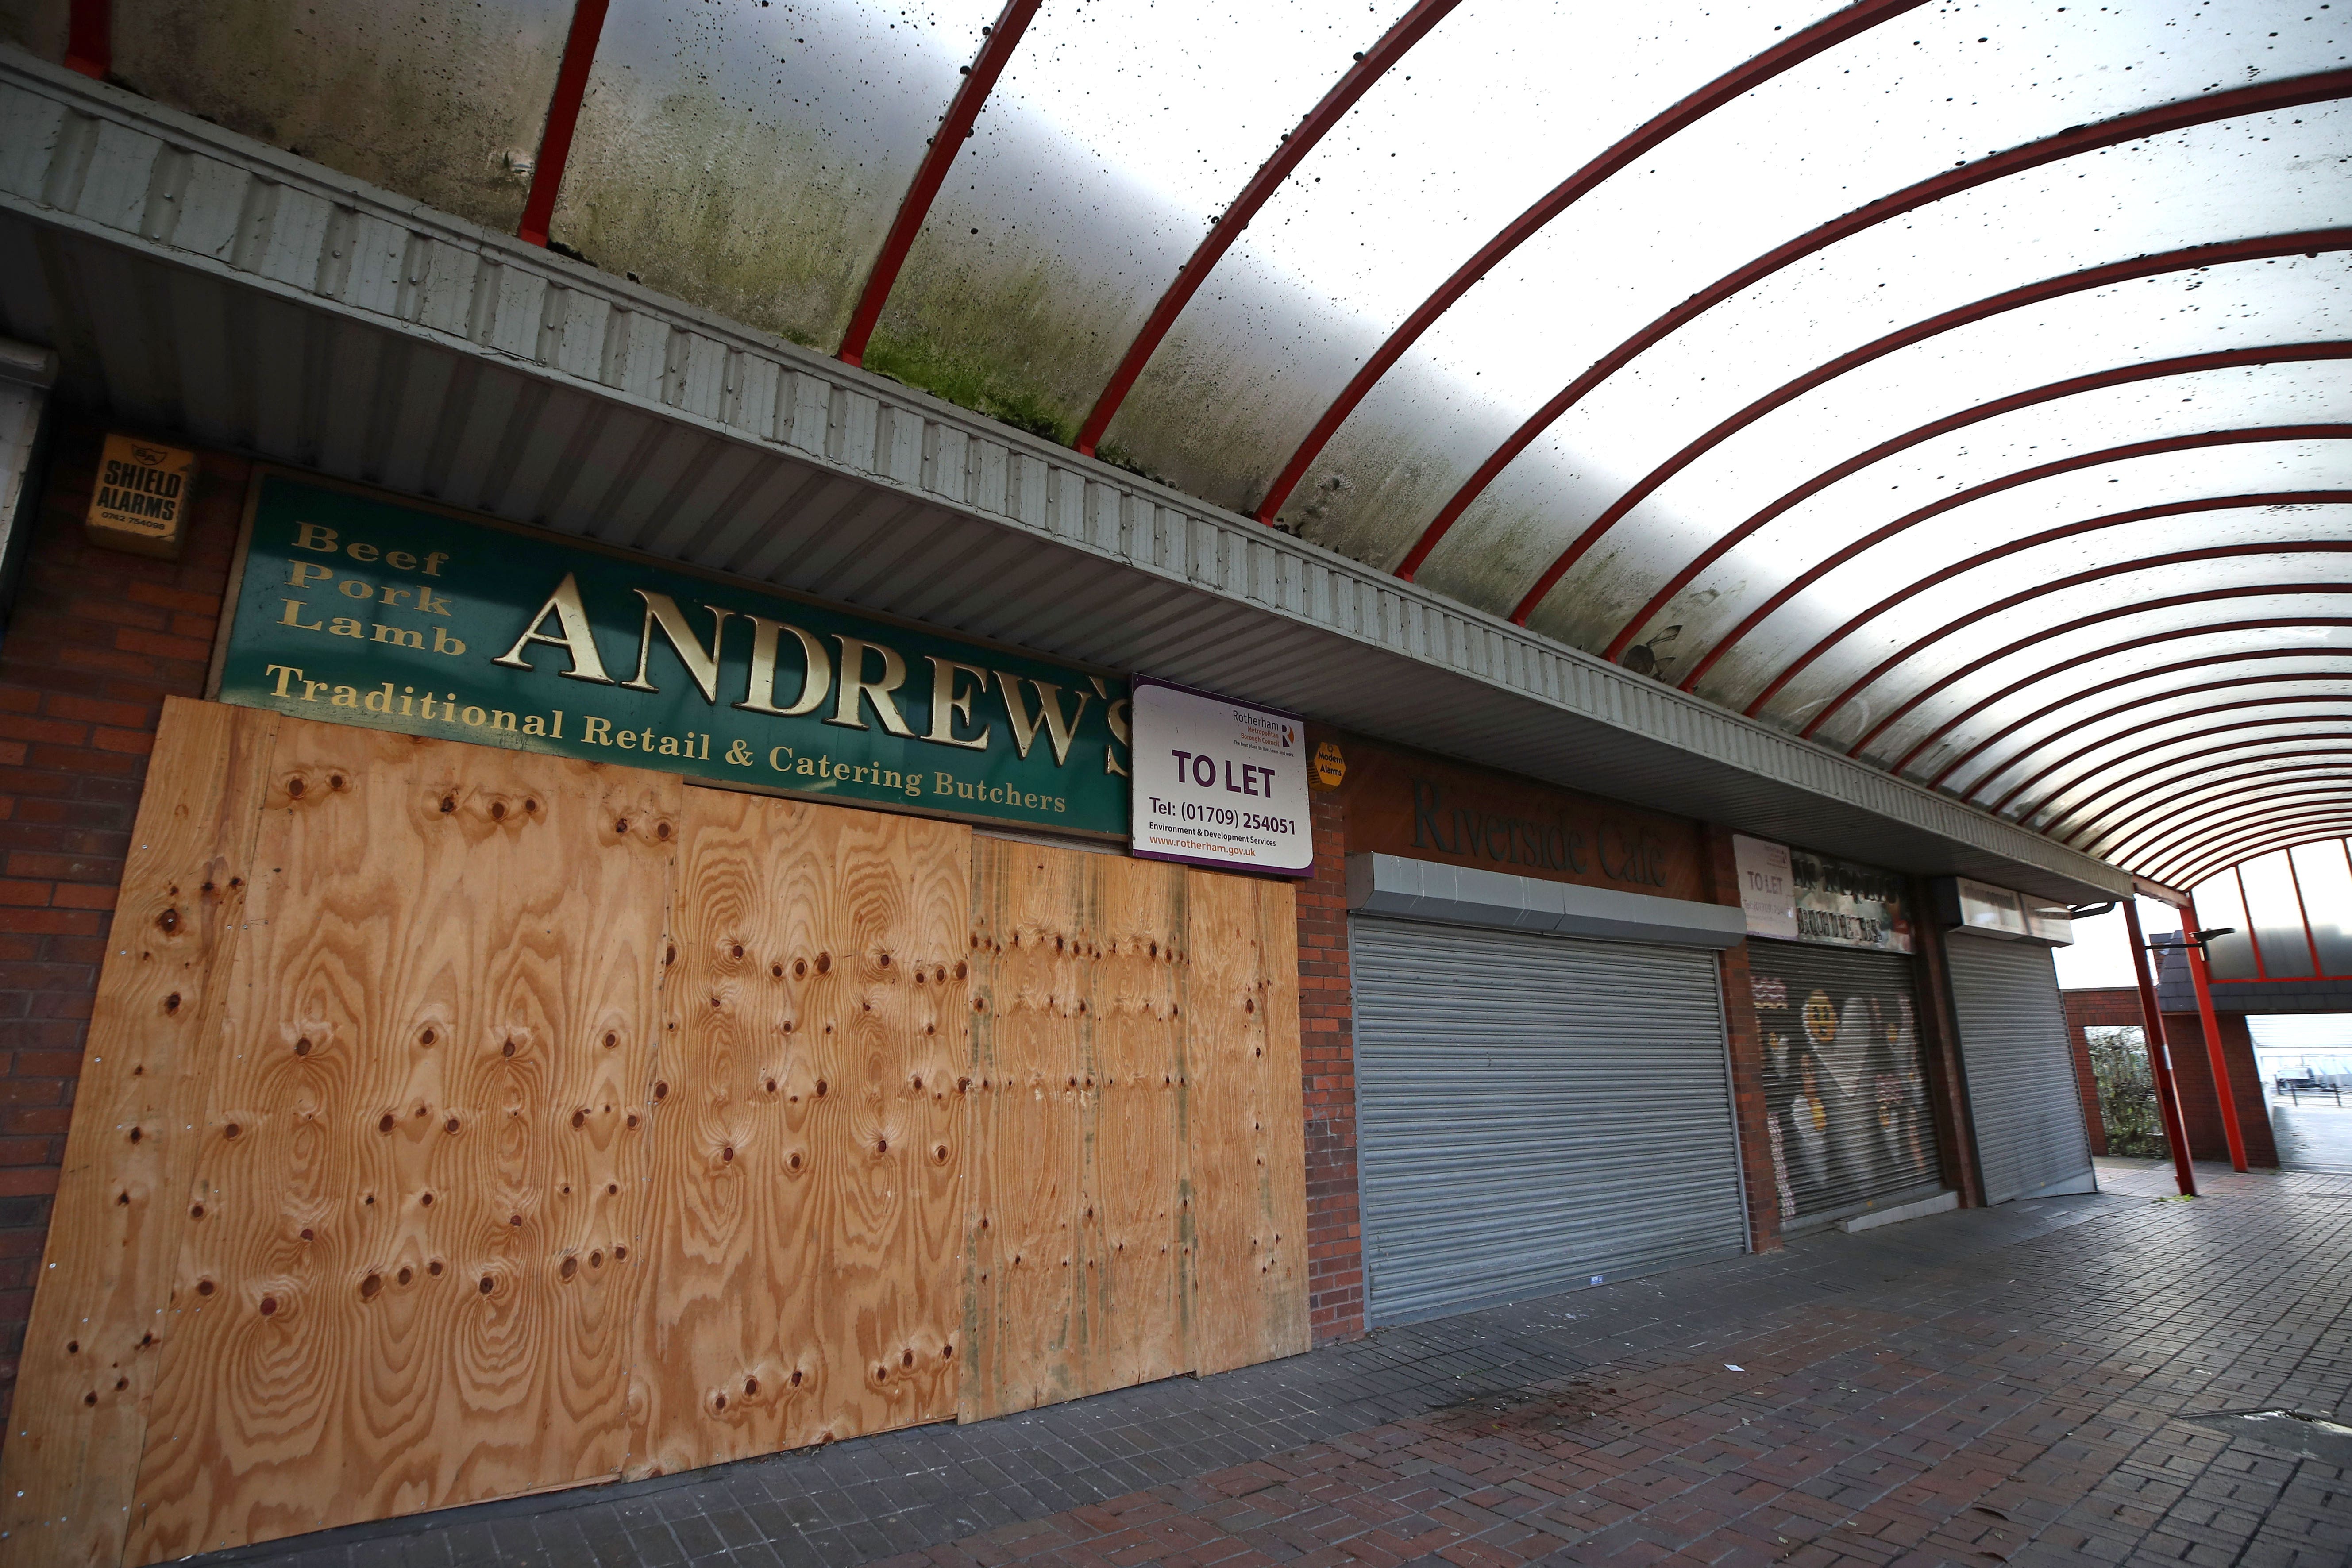 Britain has lost 6,000 storefronts in five years, figures show (Tim Goode/PA)